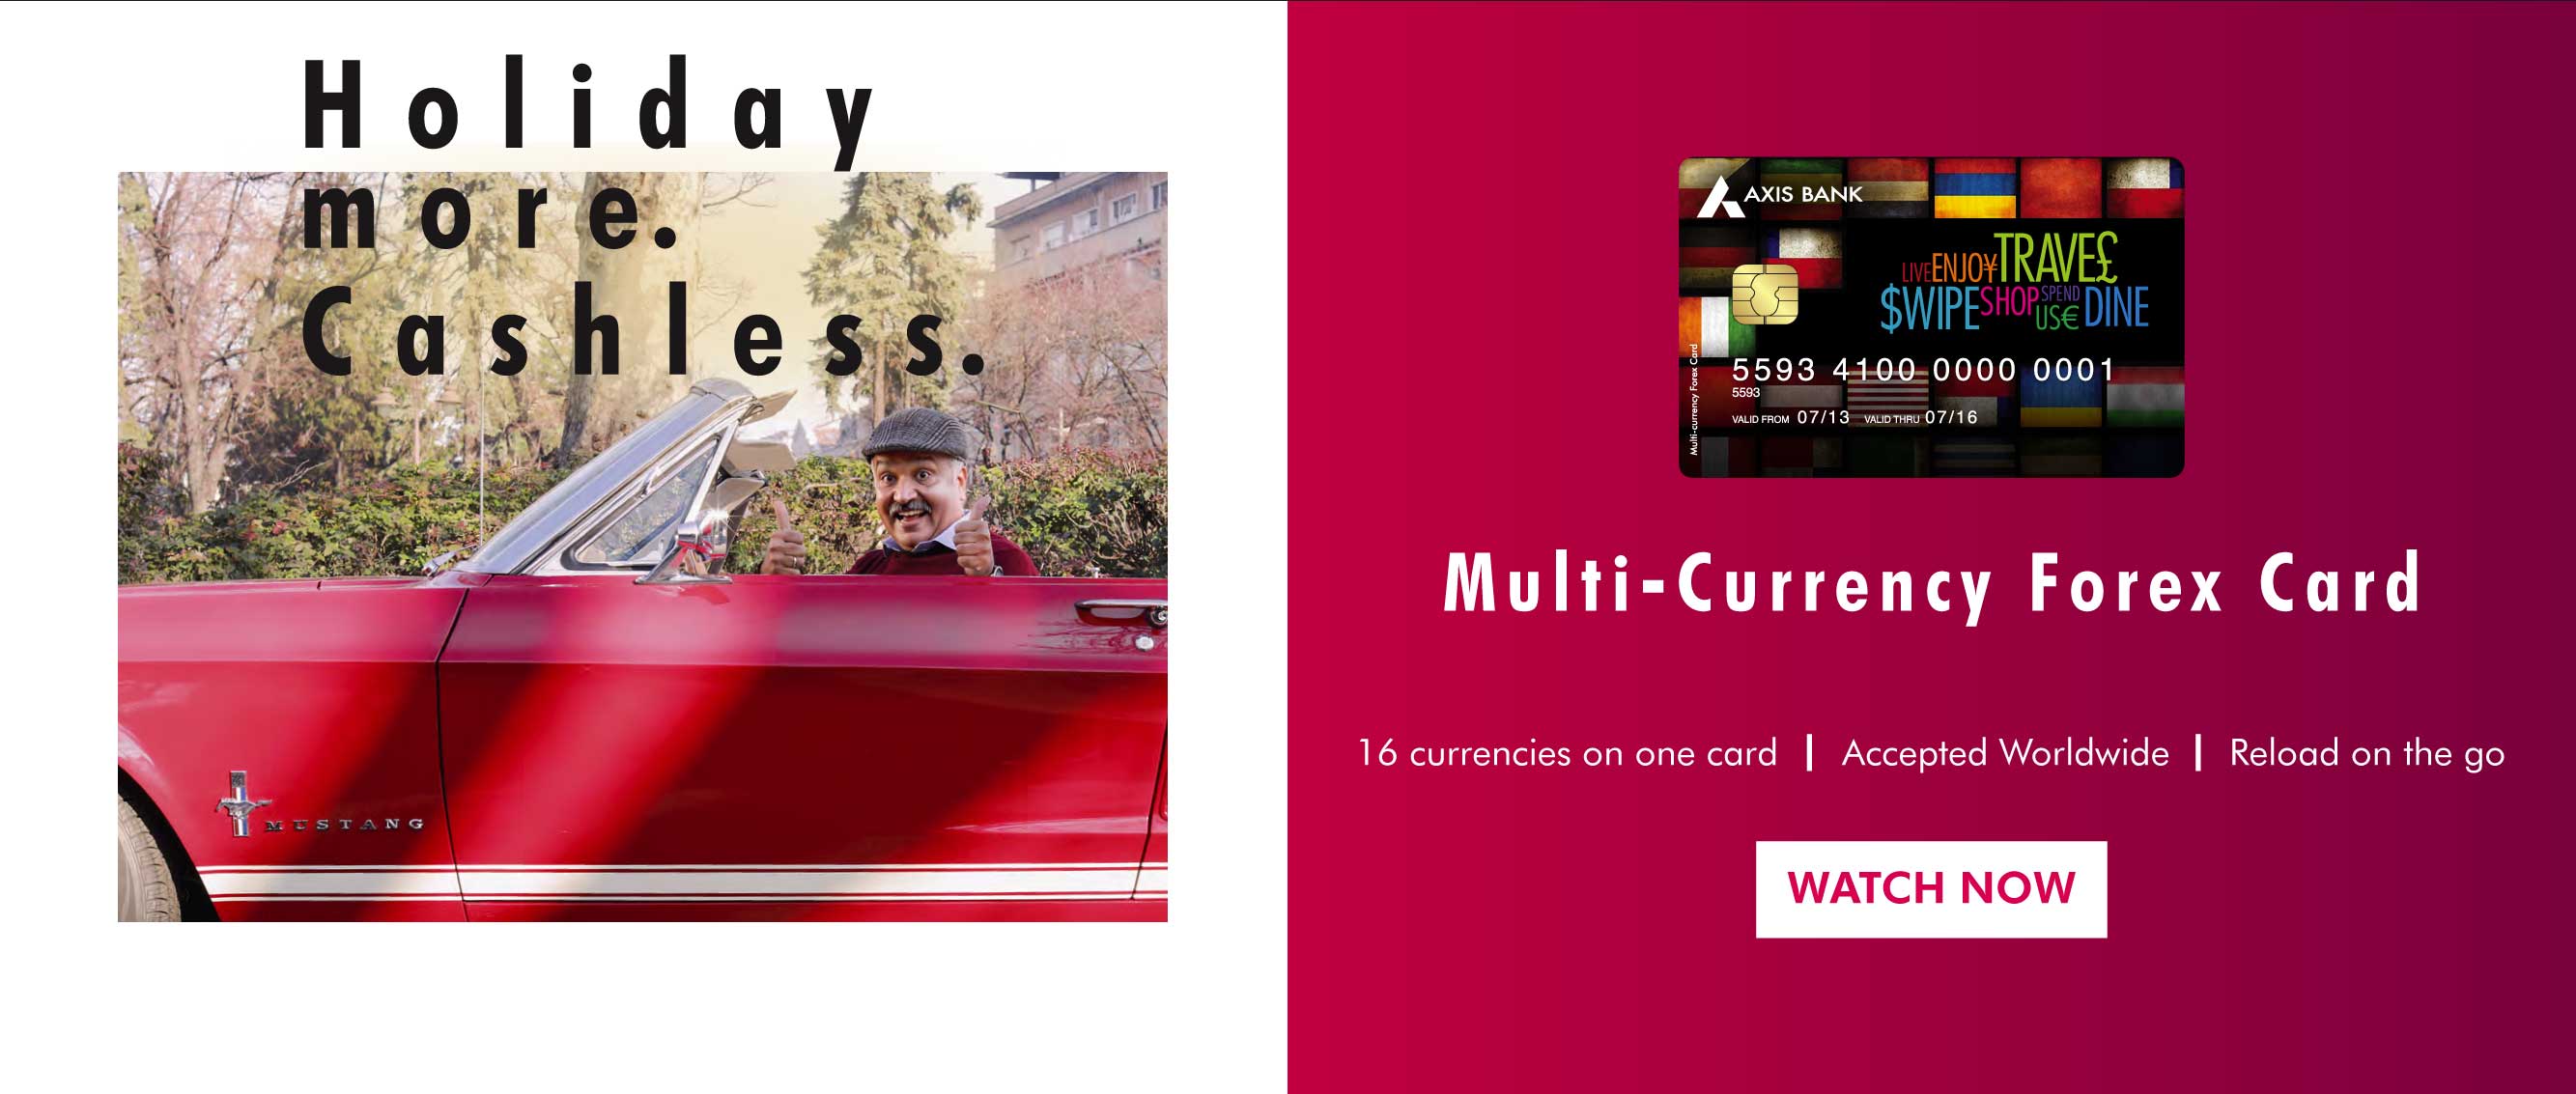 Axis bank multi currency forex card online login